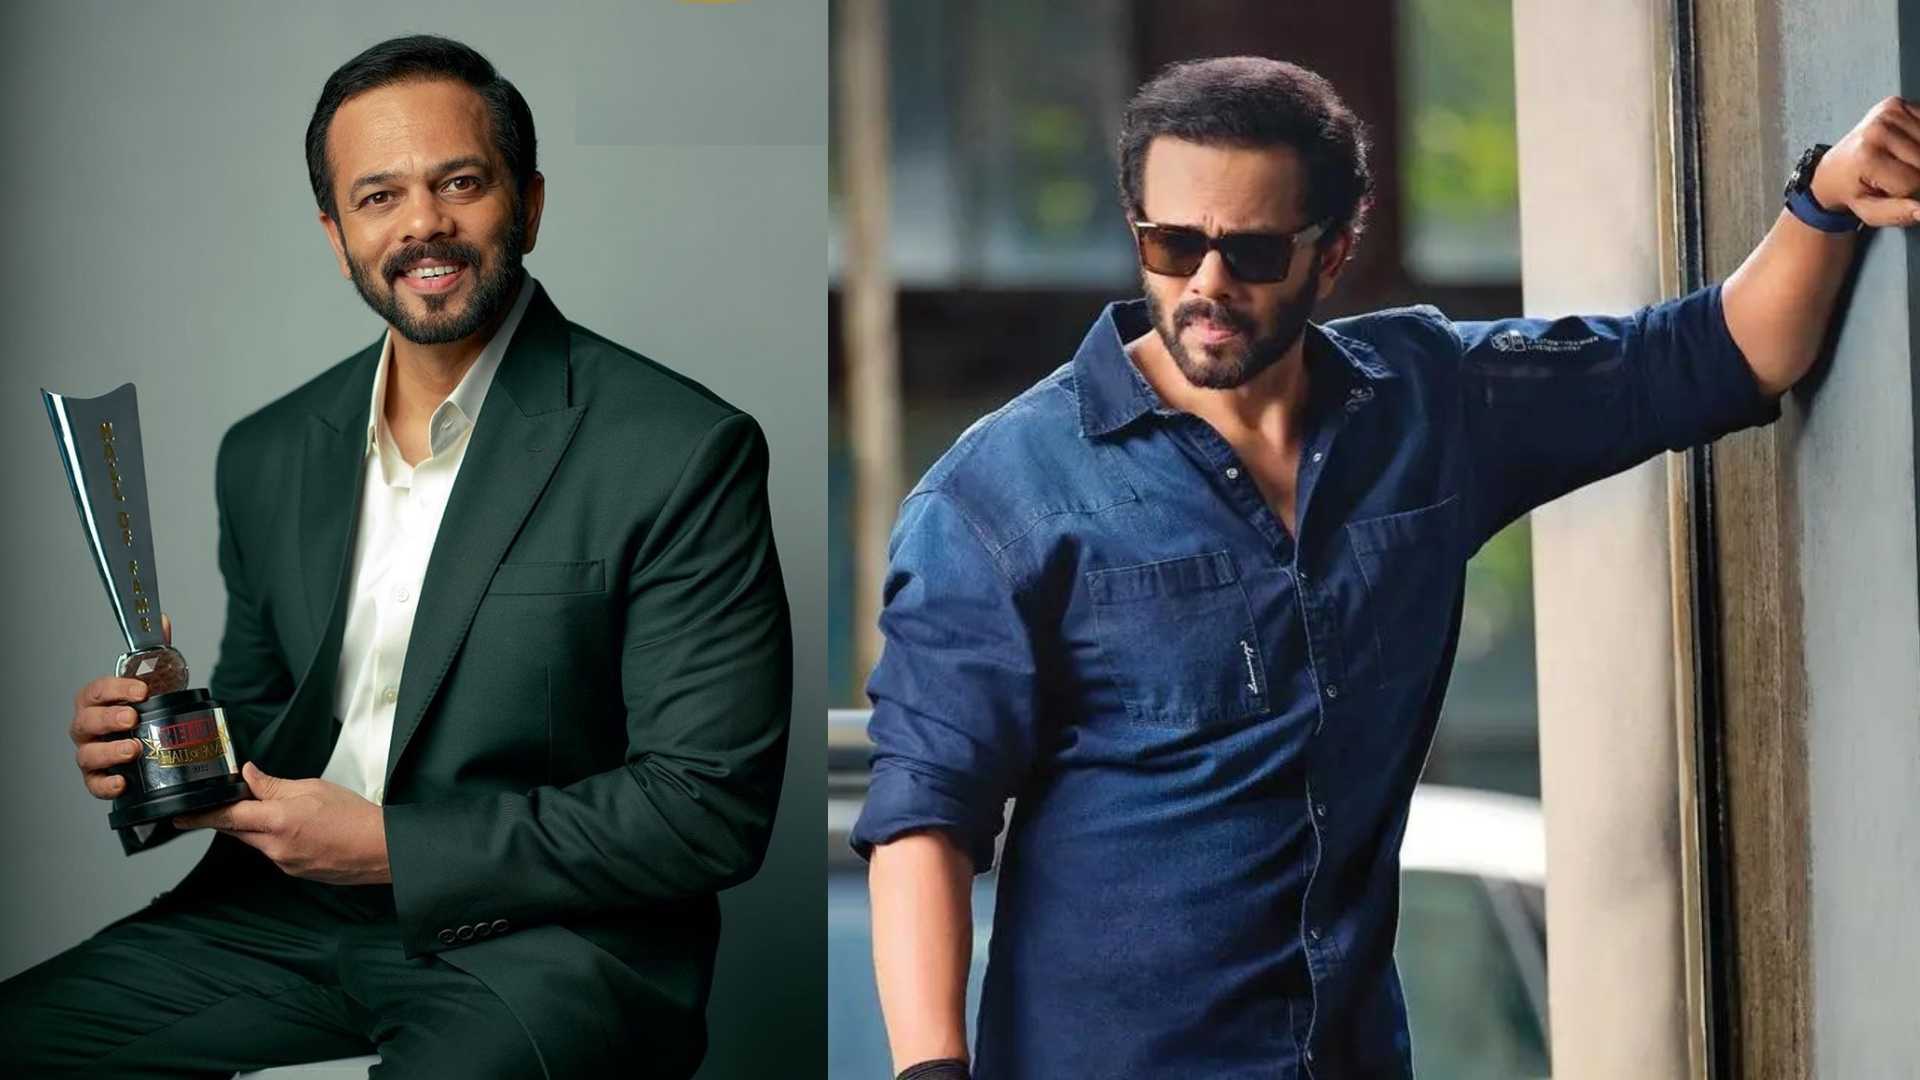 Rohit Shetty: From Rs 35 to Millions, Bio/Wiki, Net worth, House, Cars